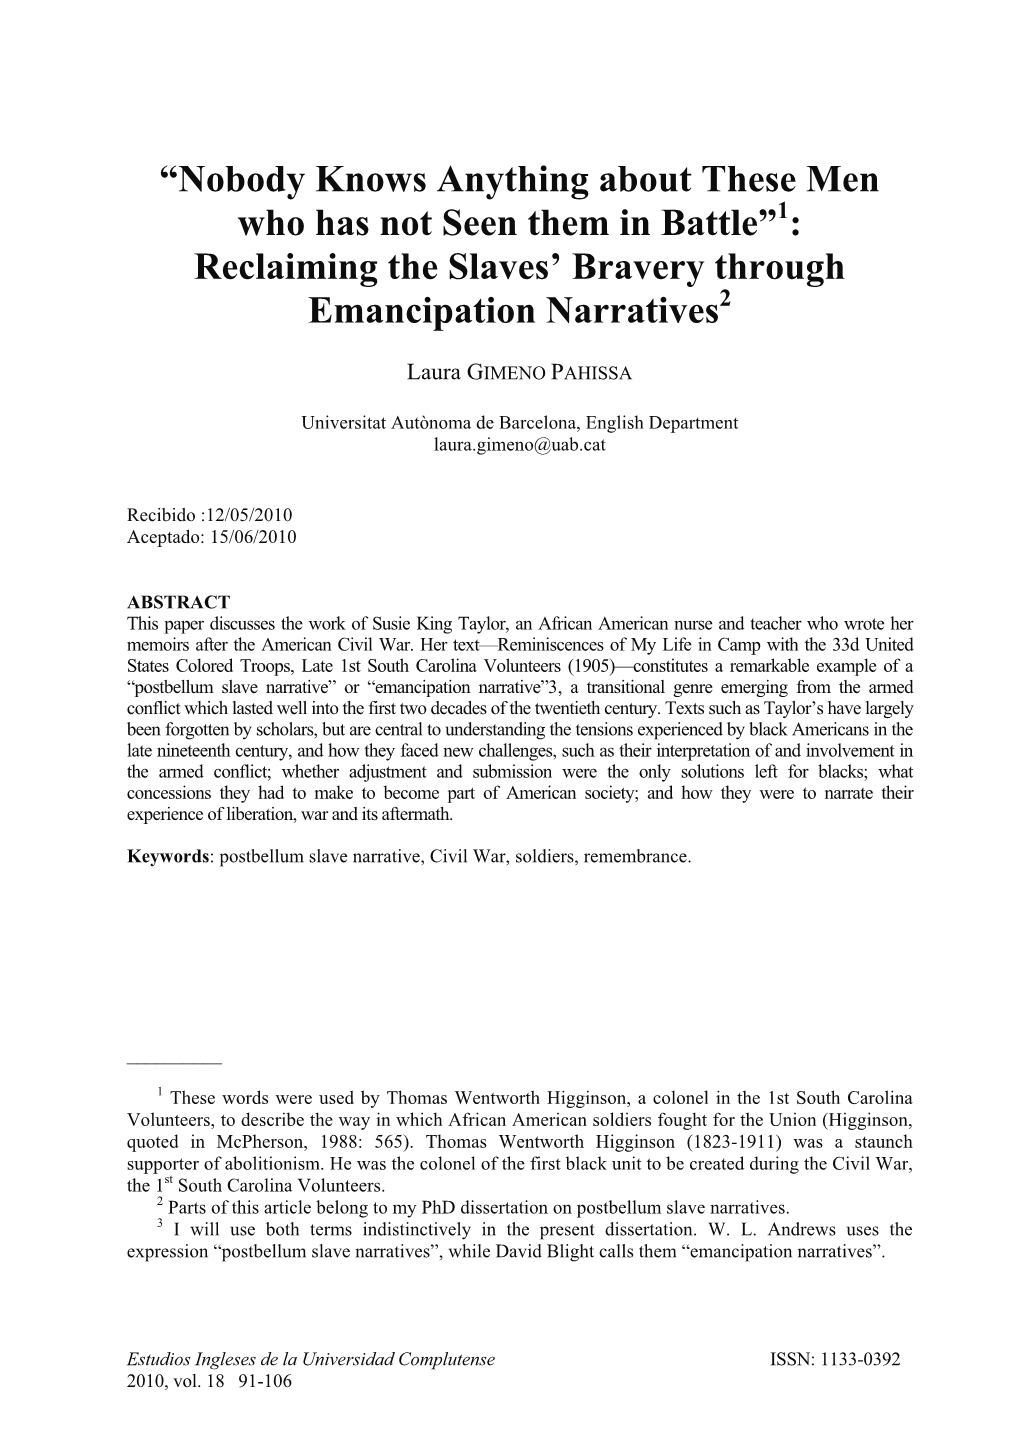 "Nobody Knows Anything About These Men Who Has Not Seen Them in Battle" Reclaiming the Slaves´Bravery Through Emancip